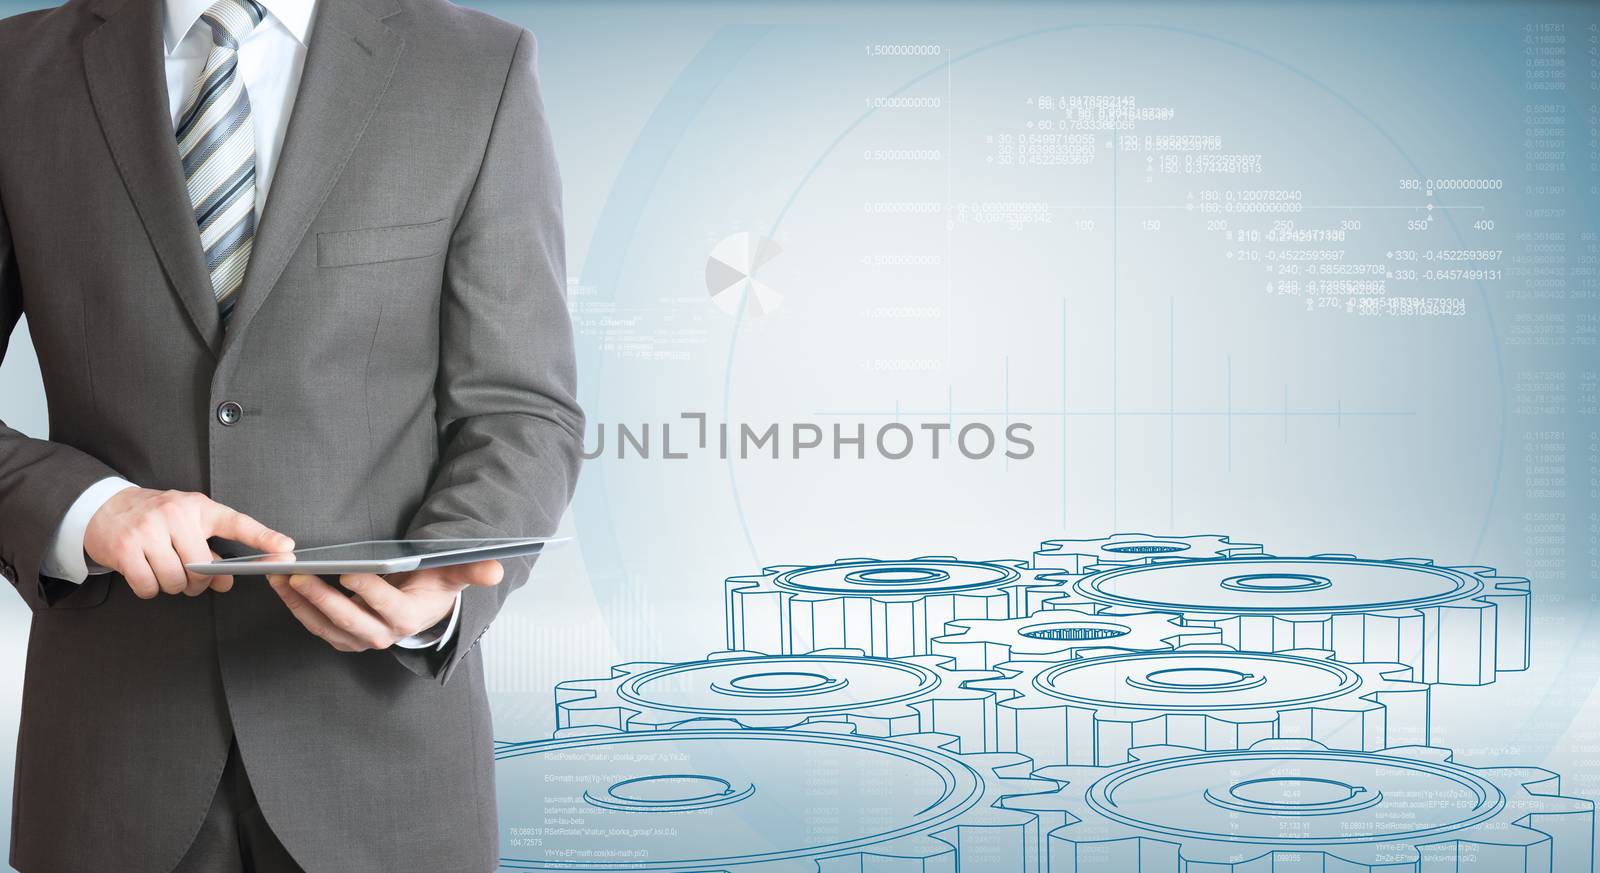 Businessman hold tablet pc. High-tech wire frame gears and graphs at backdrop